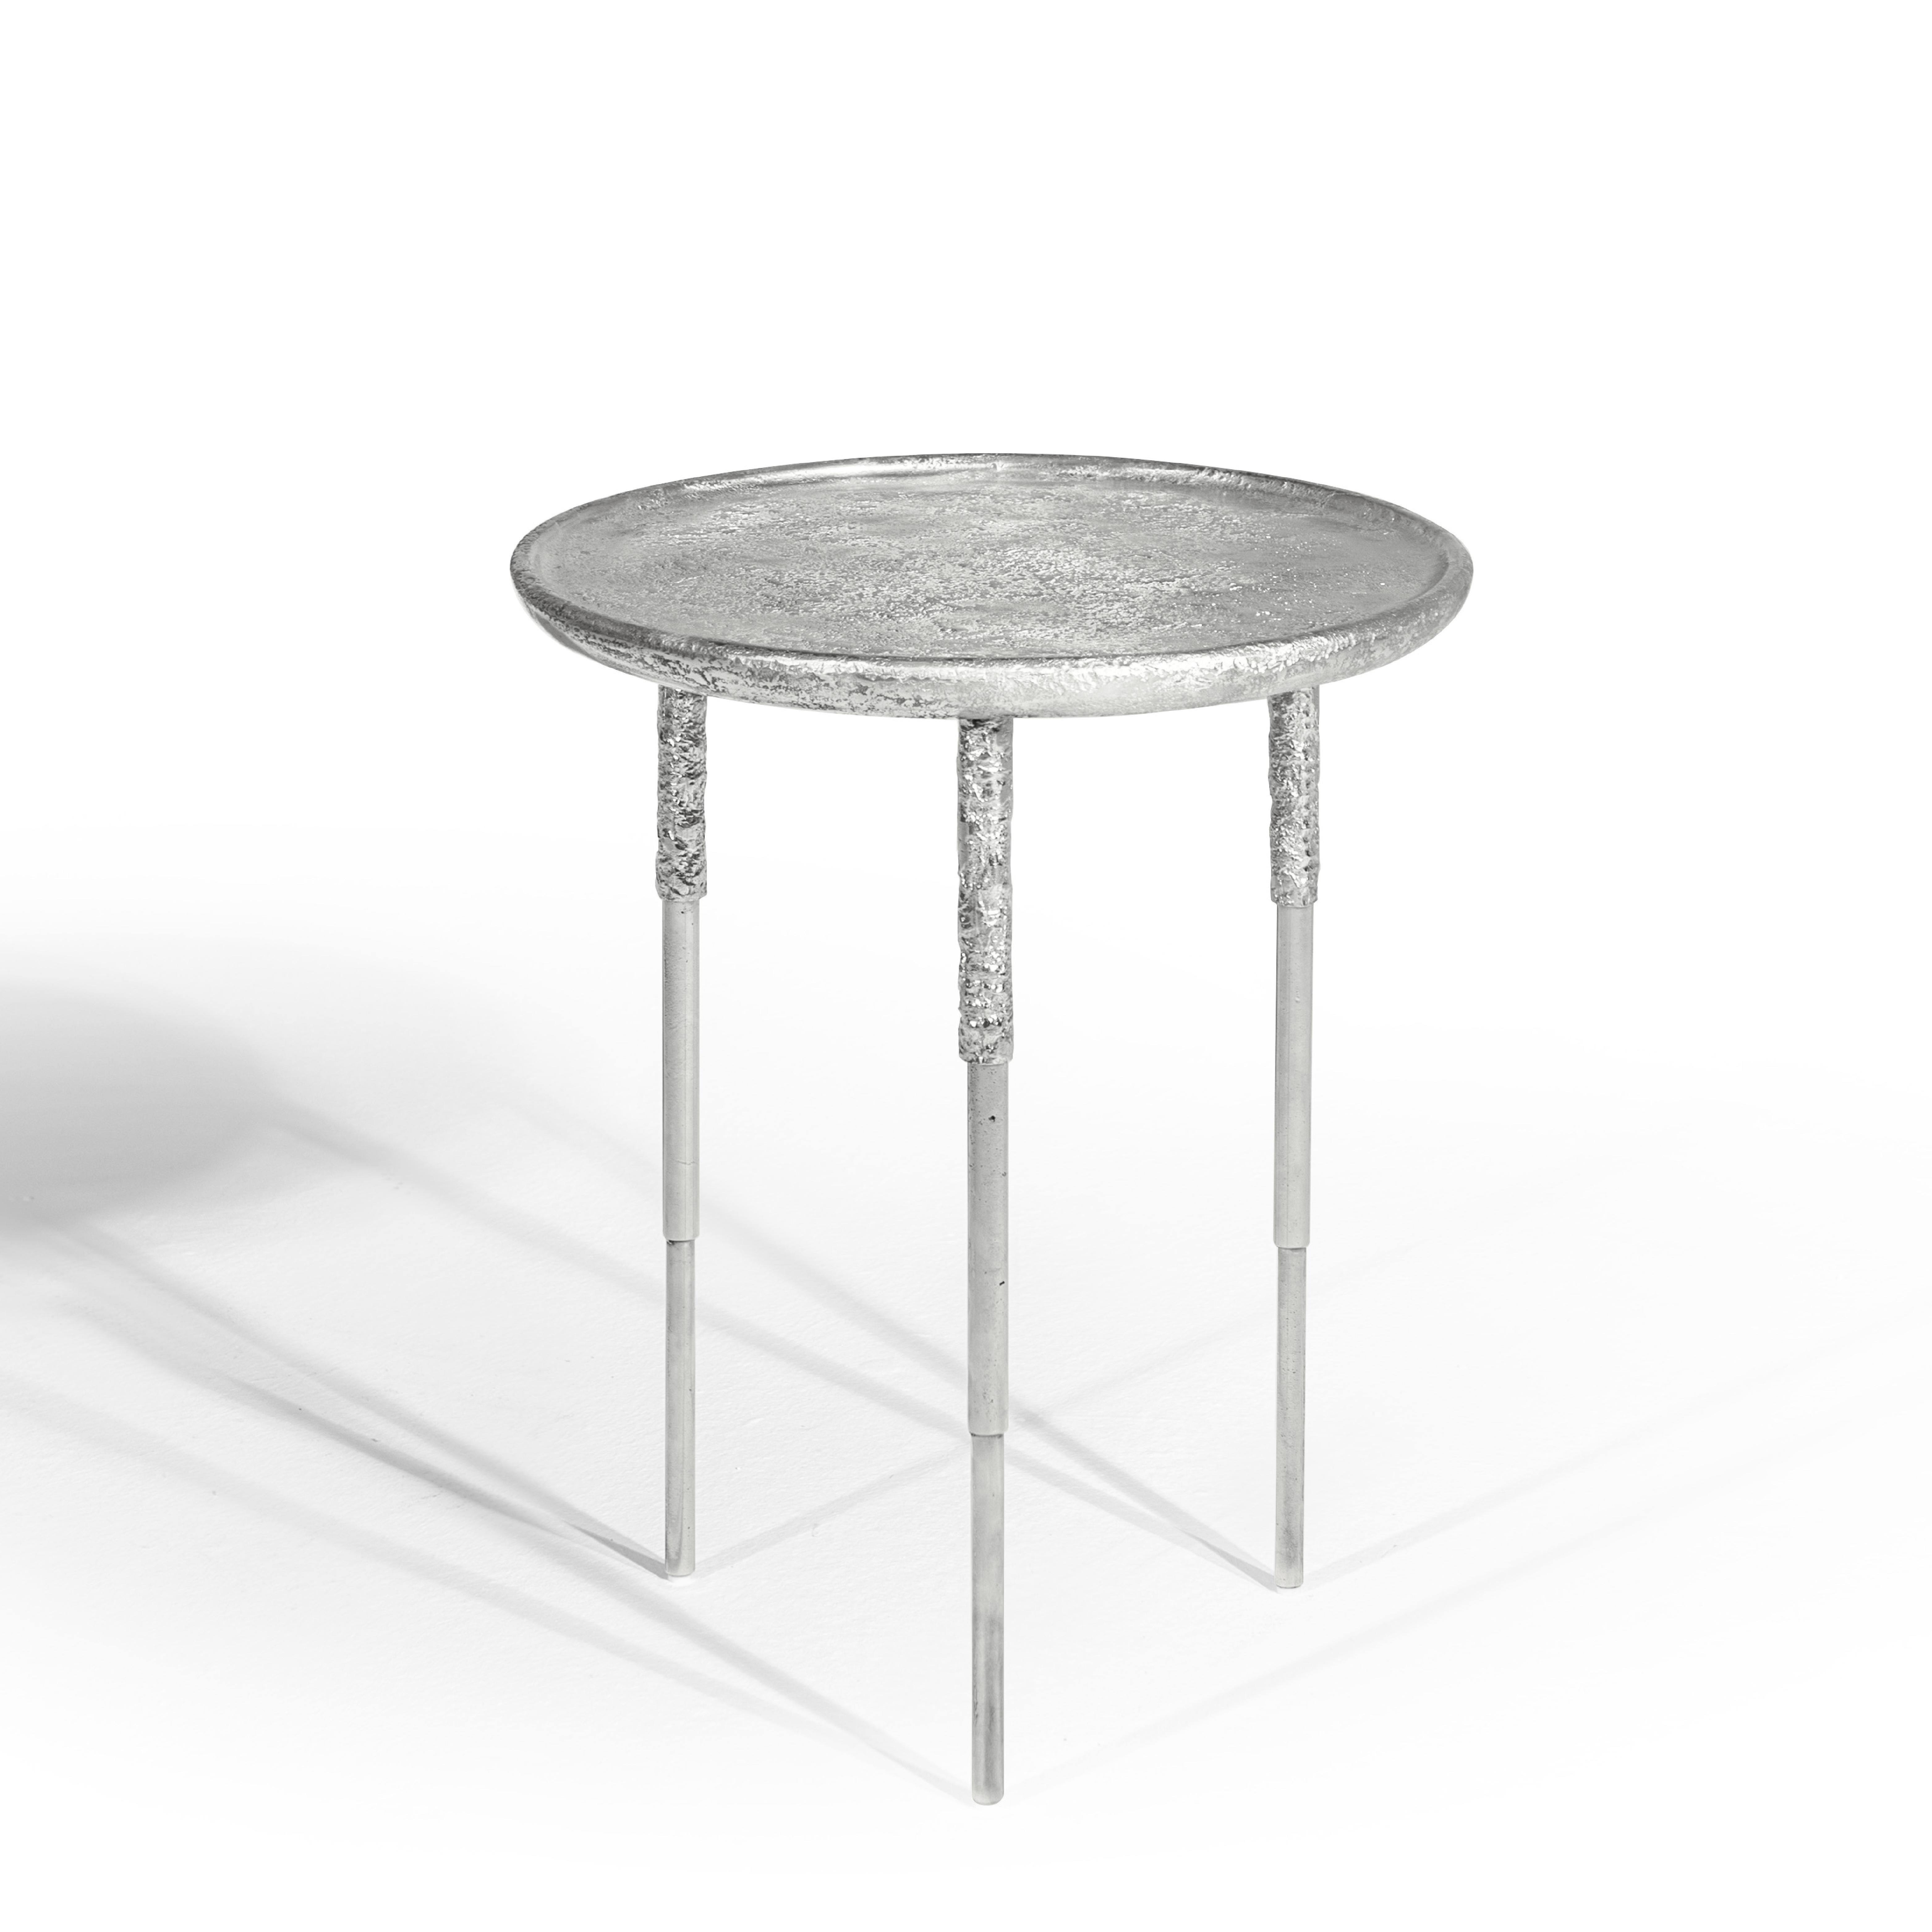 Contemporary Side Table by Hessentia, Aluminium Casting with Sculptural Texture